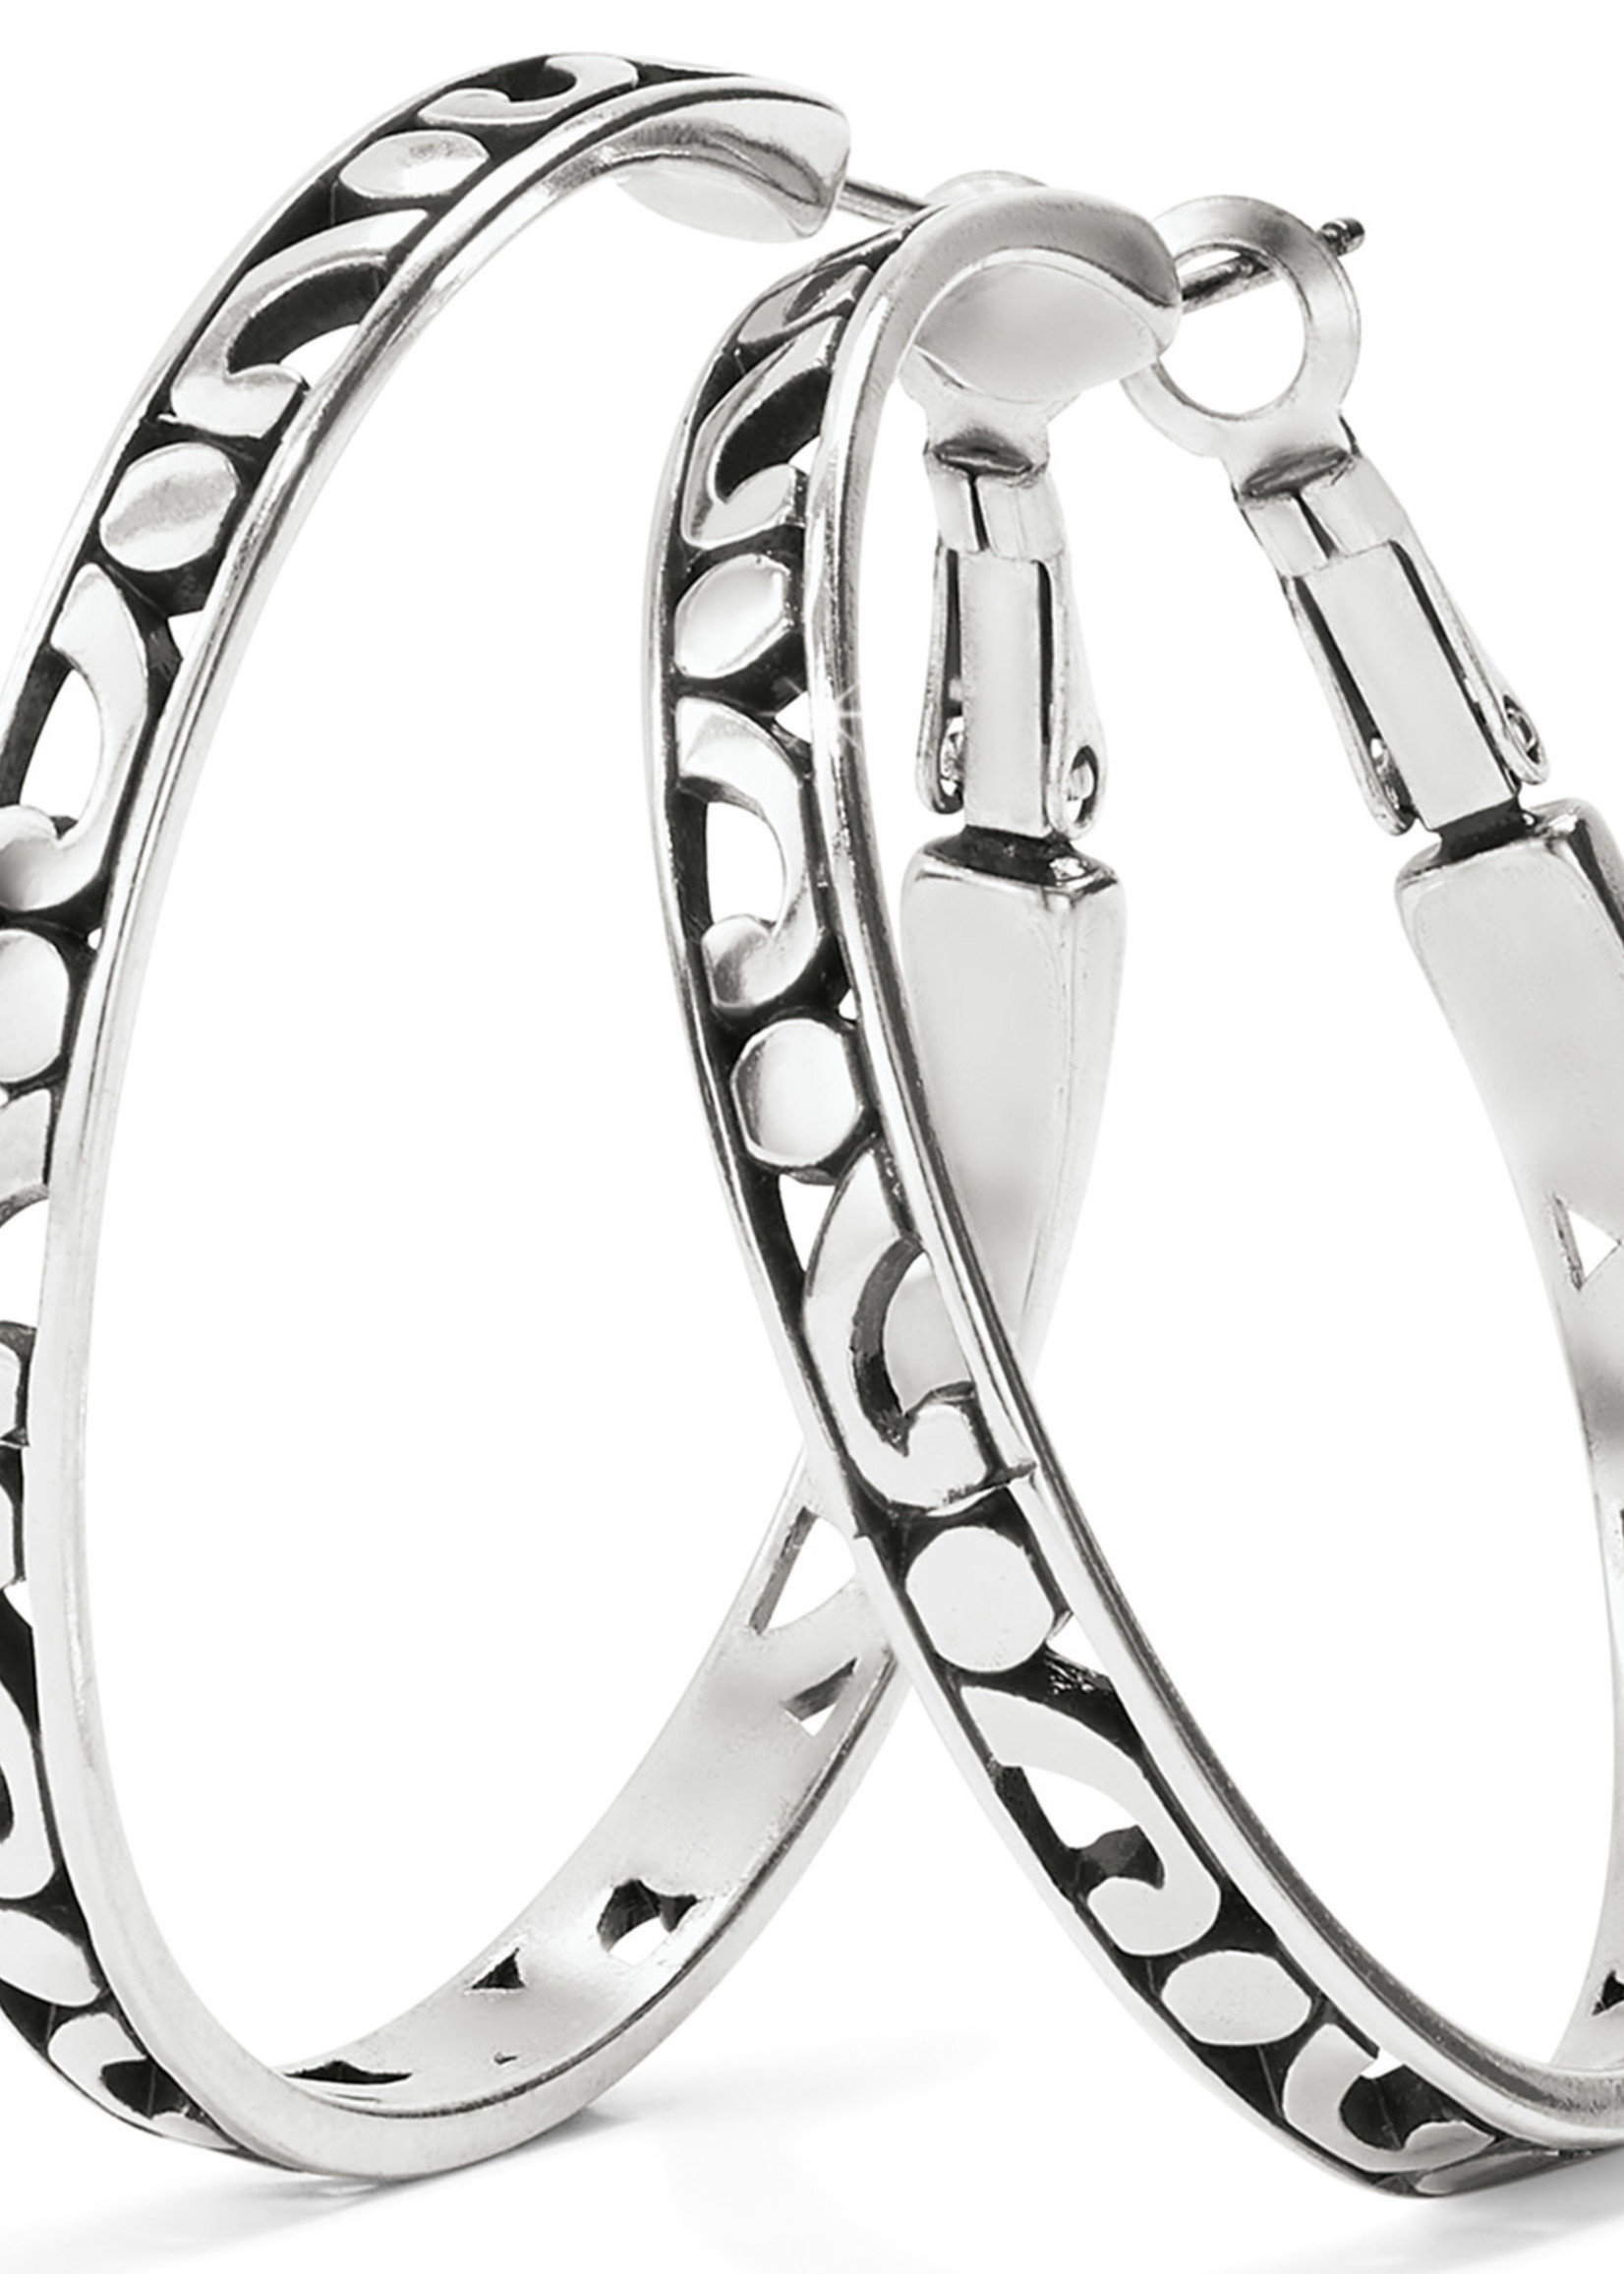 Brighton Contempo Large Hoop Earrings: Silver